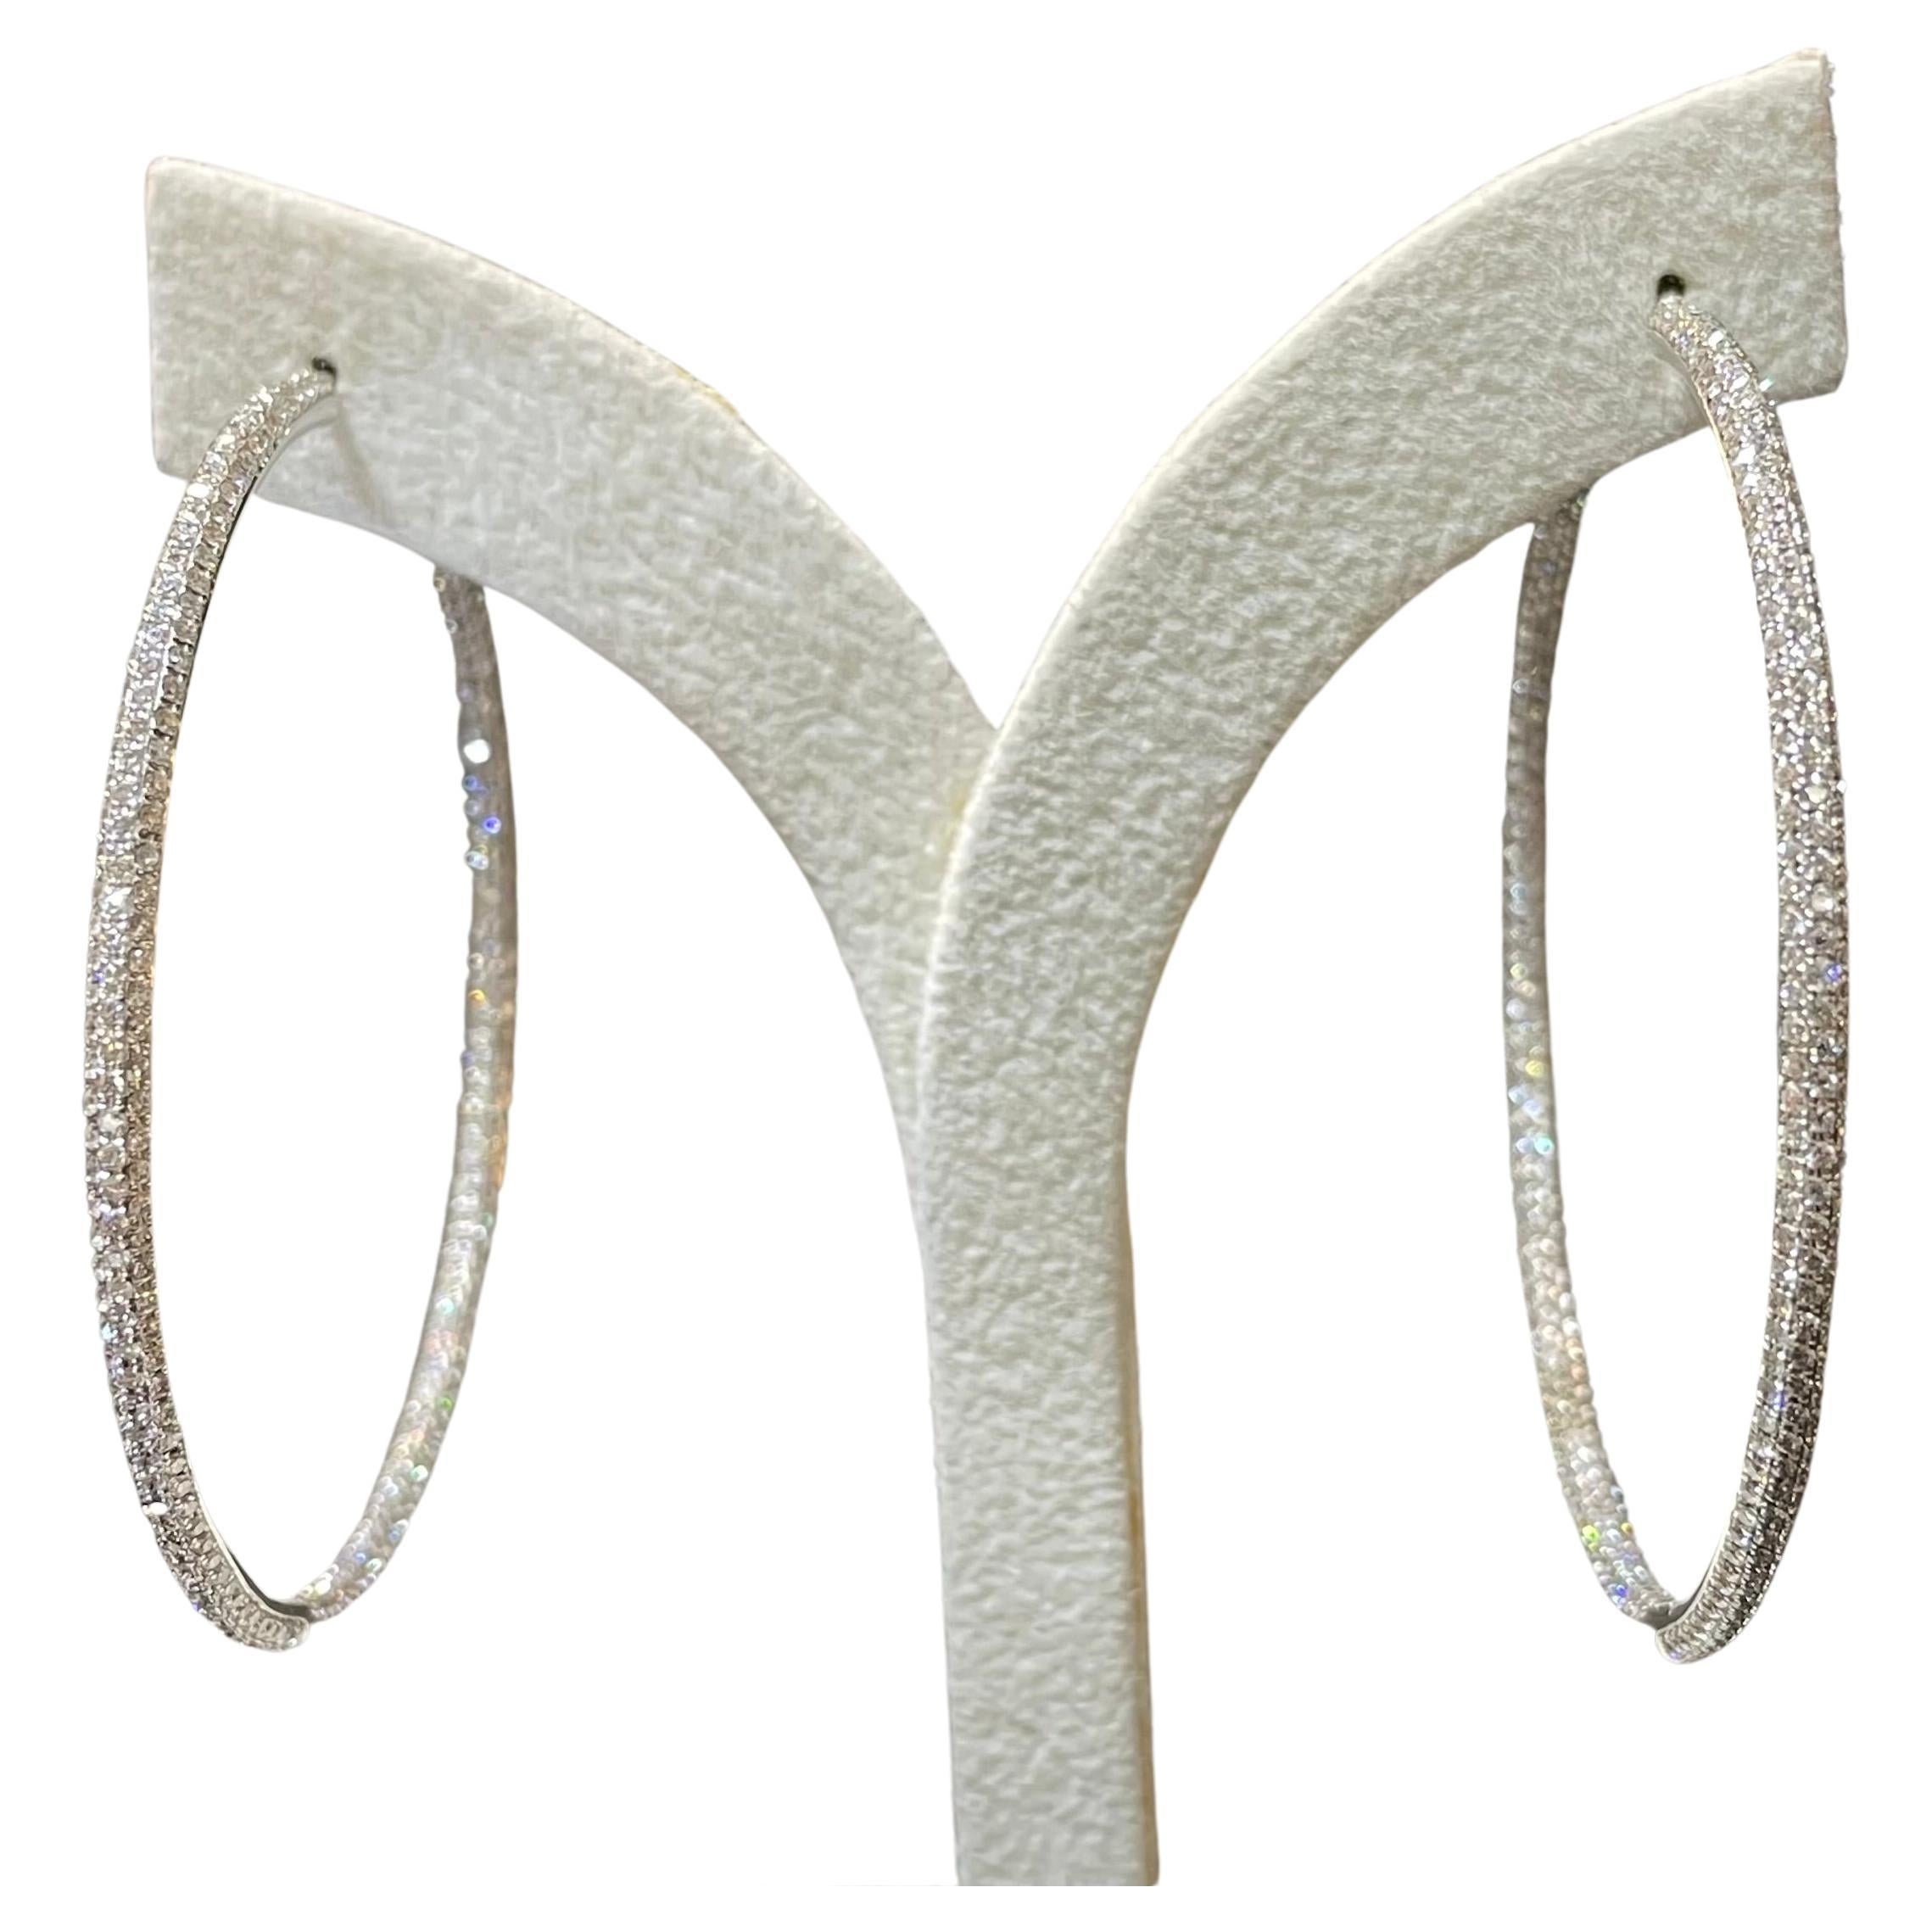  2 inches diameter hoop earrings features round brillant-cut diamonds. Totalling 691 pieces of diamonds, weighing 3.15 carats. Made in 18K white gold. Perfect gift for you and your loved one.